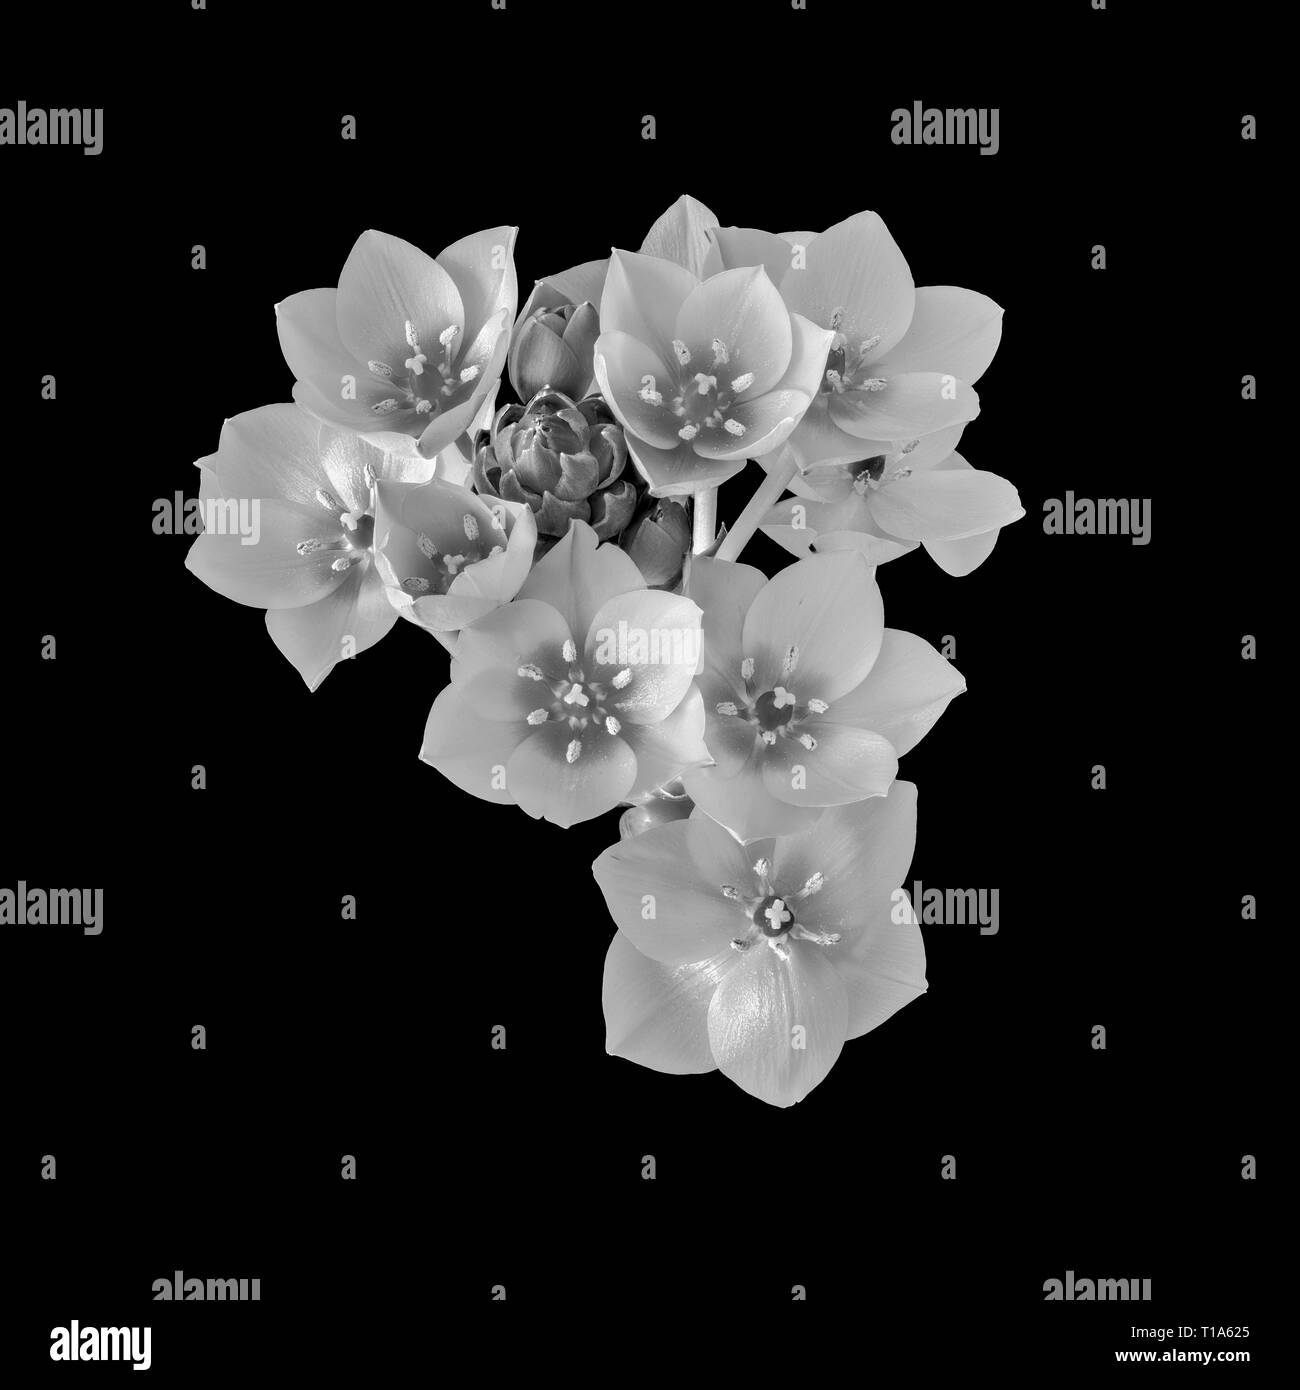 Fine art still life monochrome floral macro of a white cluster of Star-of-Bethlehem / ornithogalum flower blossoms and bud on black background Stock Photo